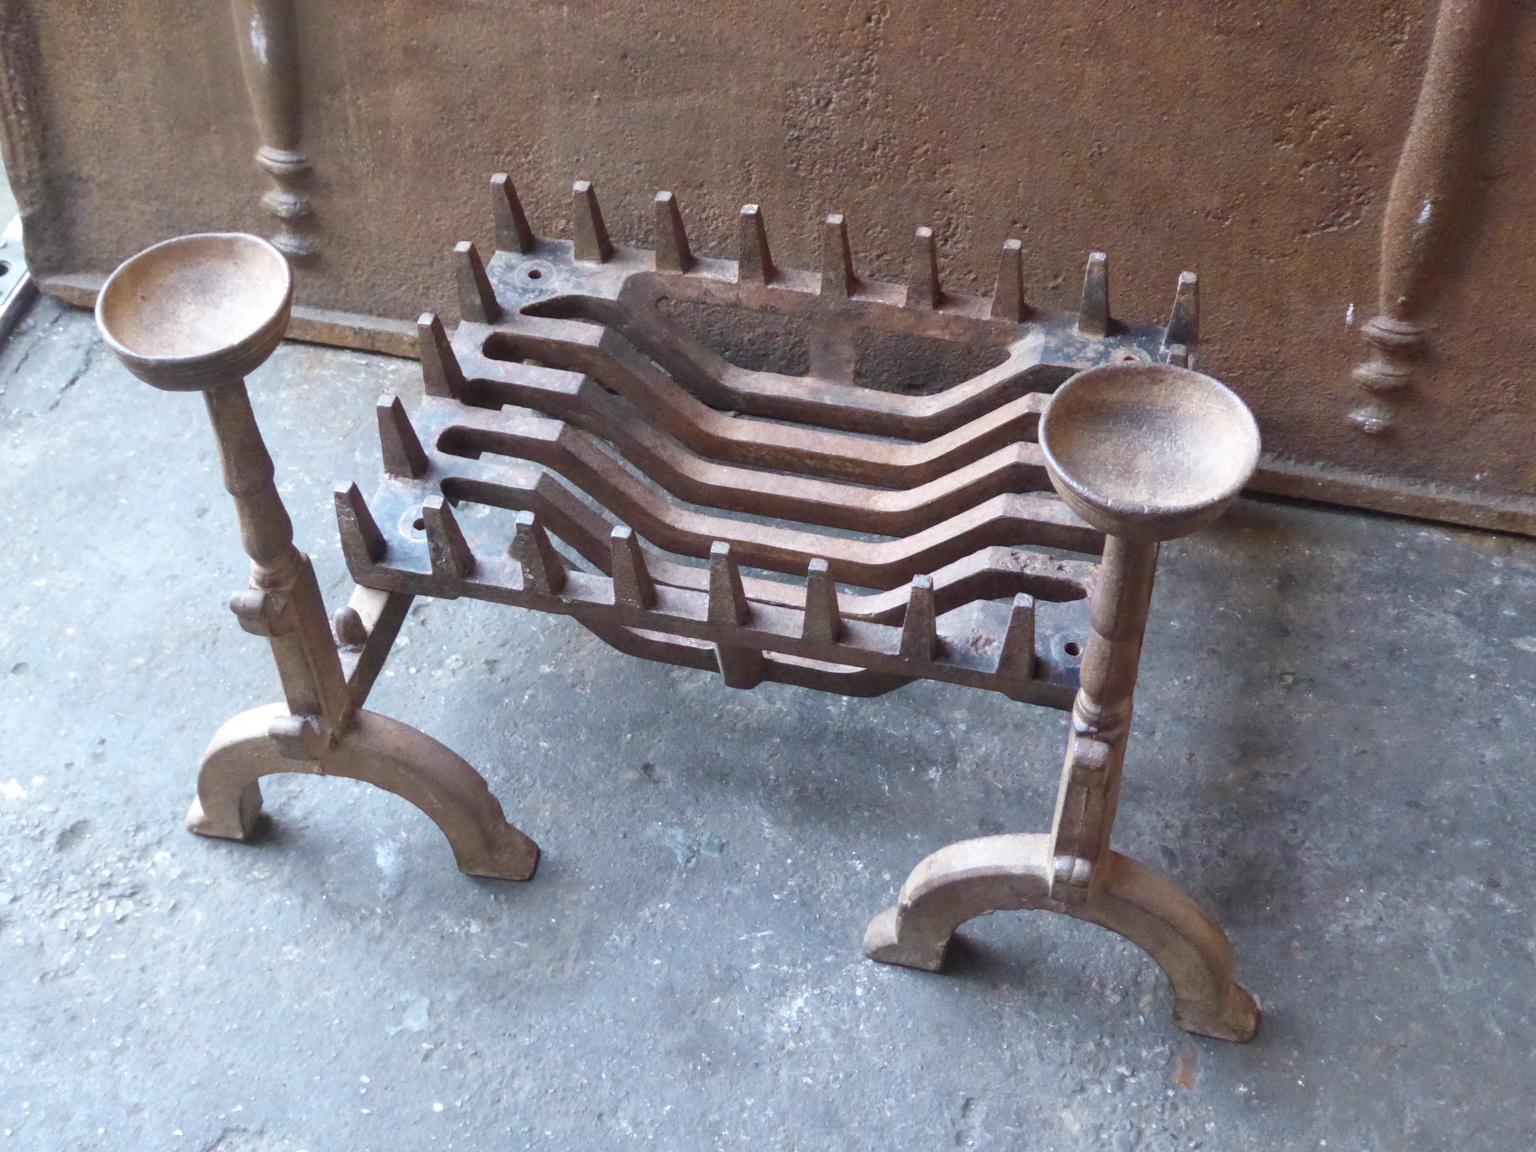 Cast  Antique English Victorian Fireplace Grate or Fire Grate, 19th Century